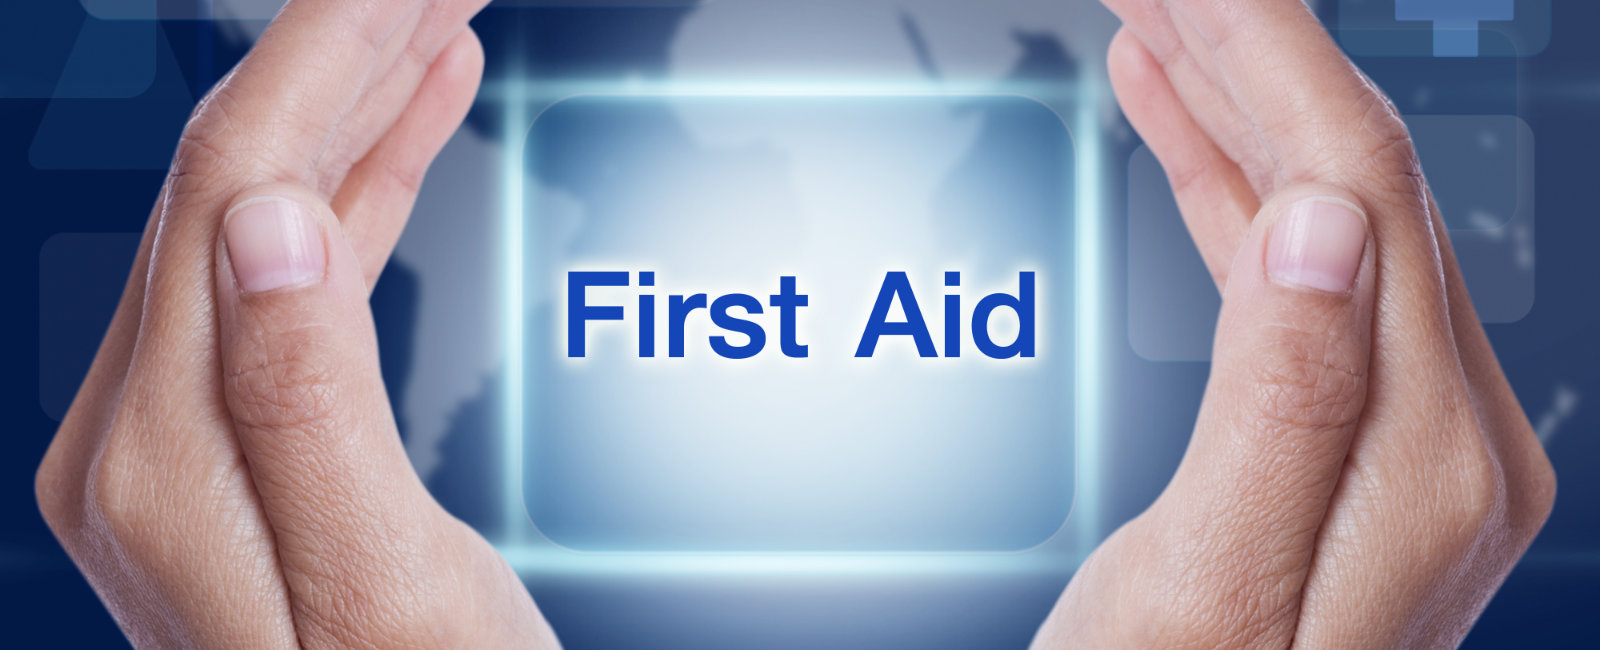 Online first aid and basic life support courses